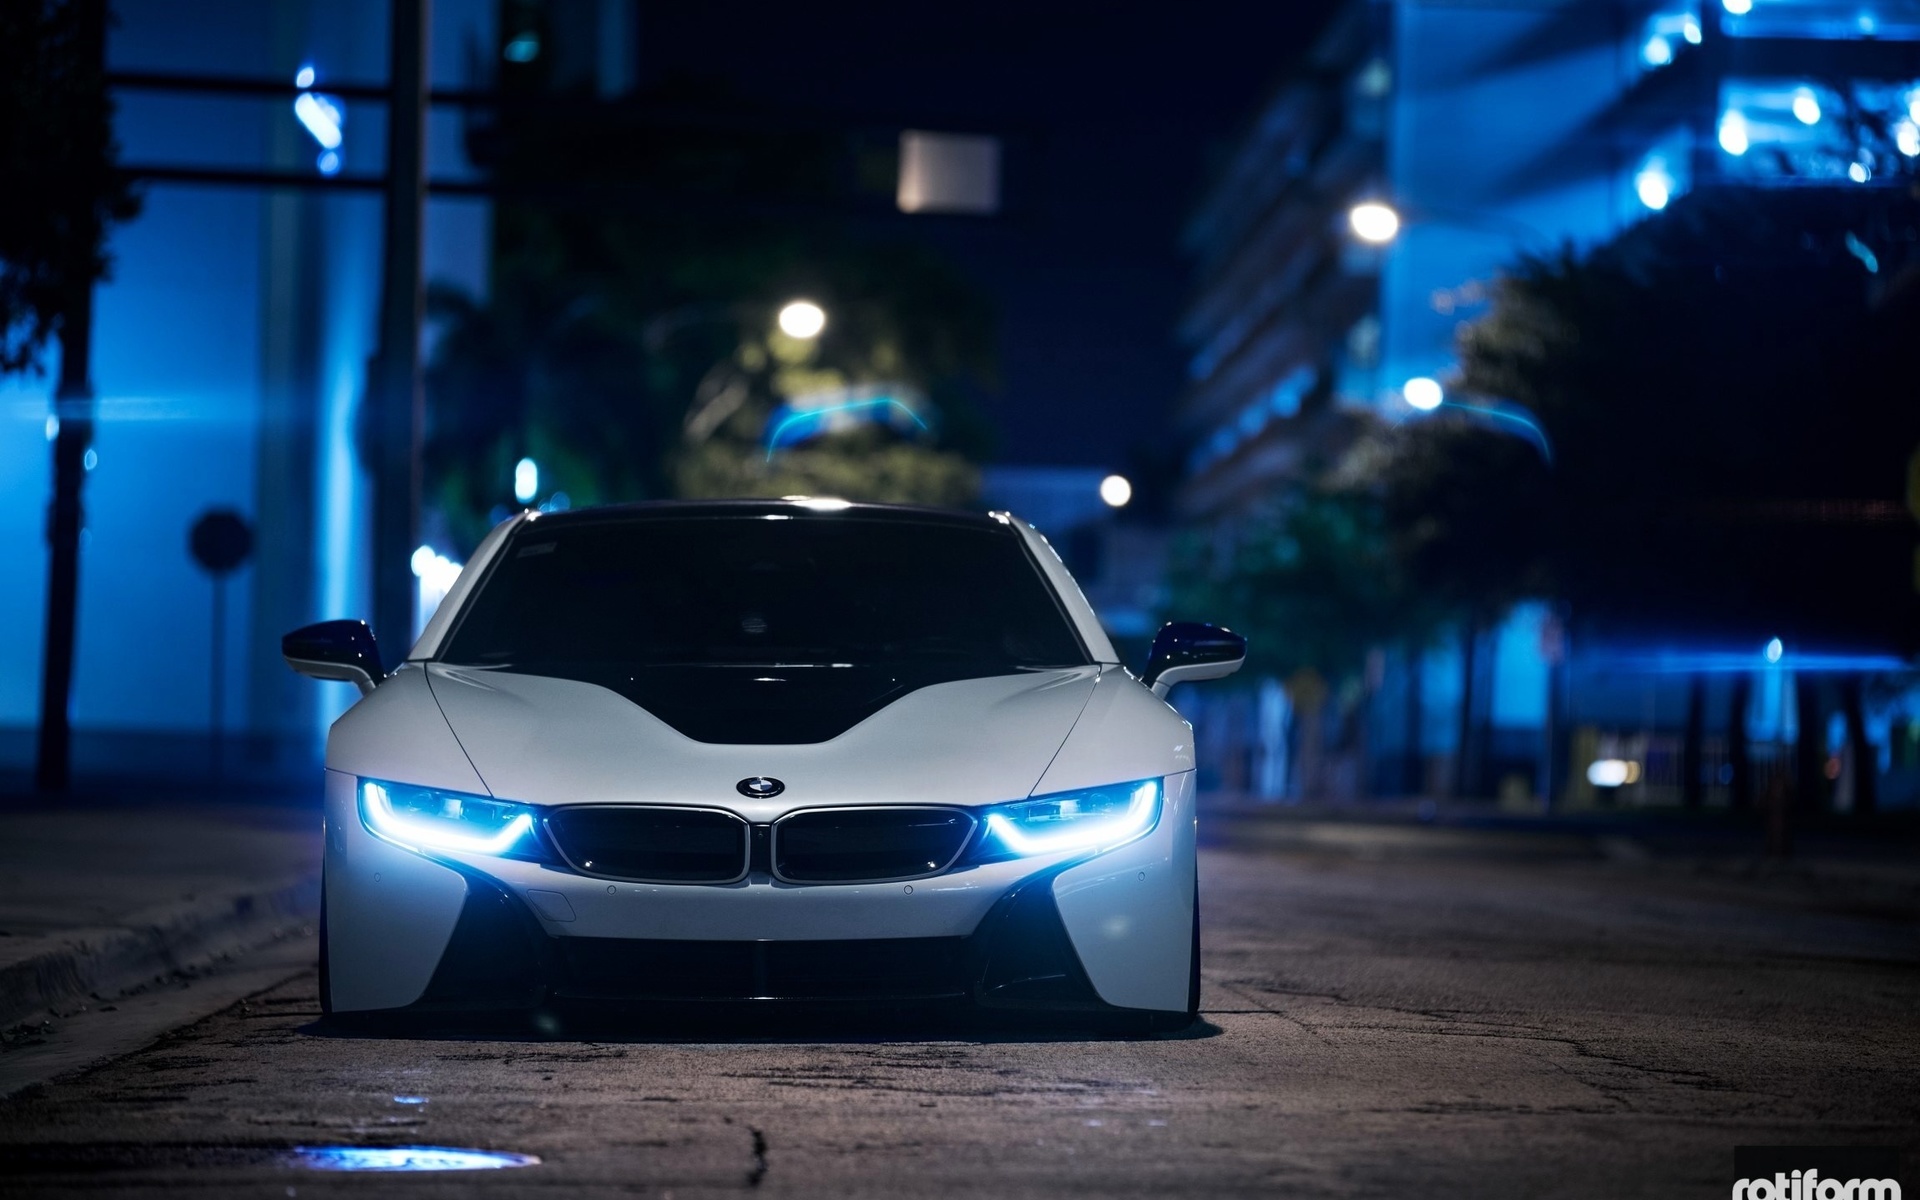 bmw, i8, electro car, tuning, wheels, face, germany, black, stance, low, night